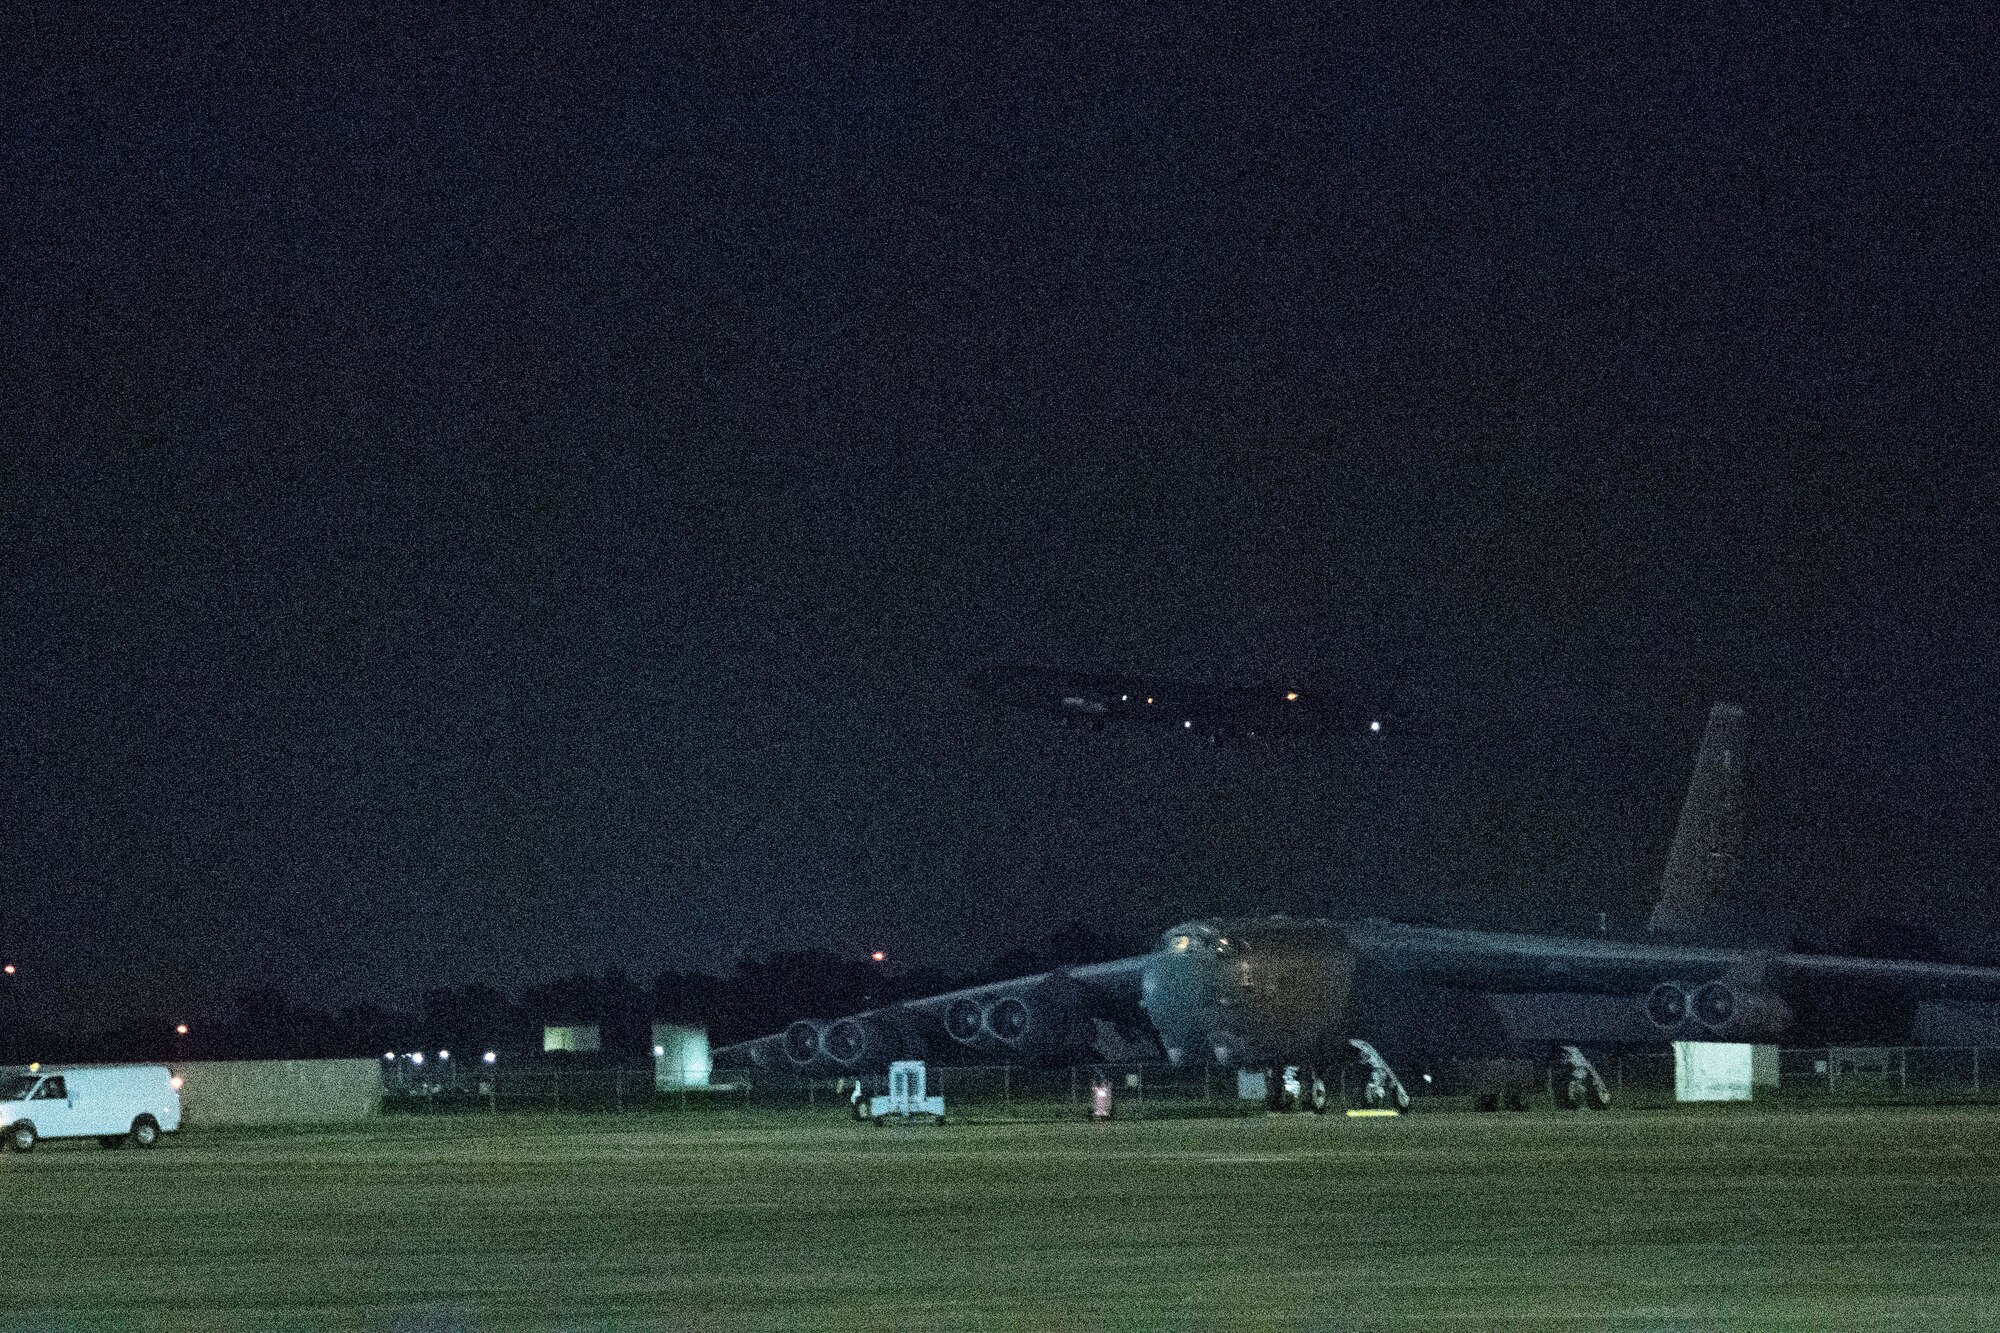 A B-52H Stratofortress takes off in support of a U.S. Strategic Command Bomber Task Force from the flight line at Barksdale Air Force Base, La., July 2, 2020. The USSTRATCOM regularly conducts BTF operations across the globe as a demonstration of U.S. commitment to collective defense and integration with Geographic Combatant Command operations and activities. (U.S. Air Force photo by Senior Airman Tessa B. Corrick)